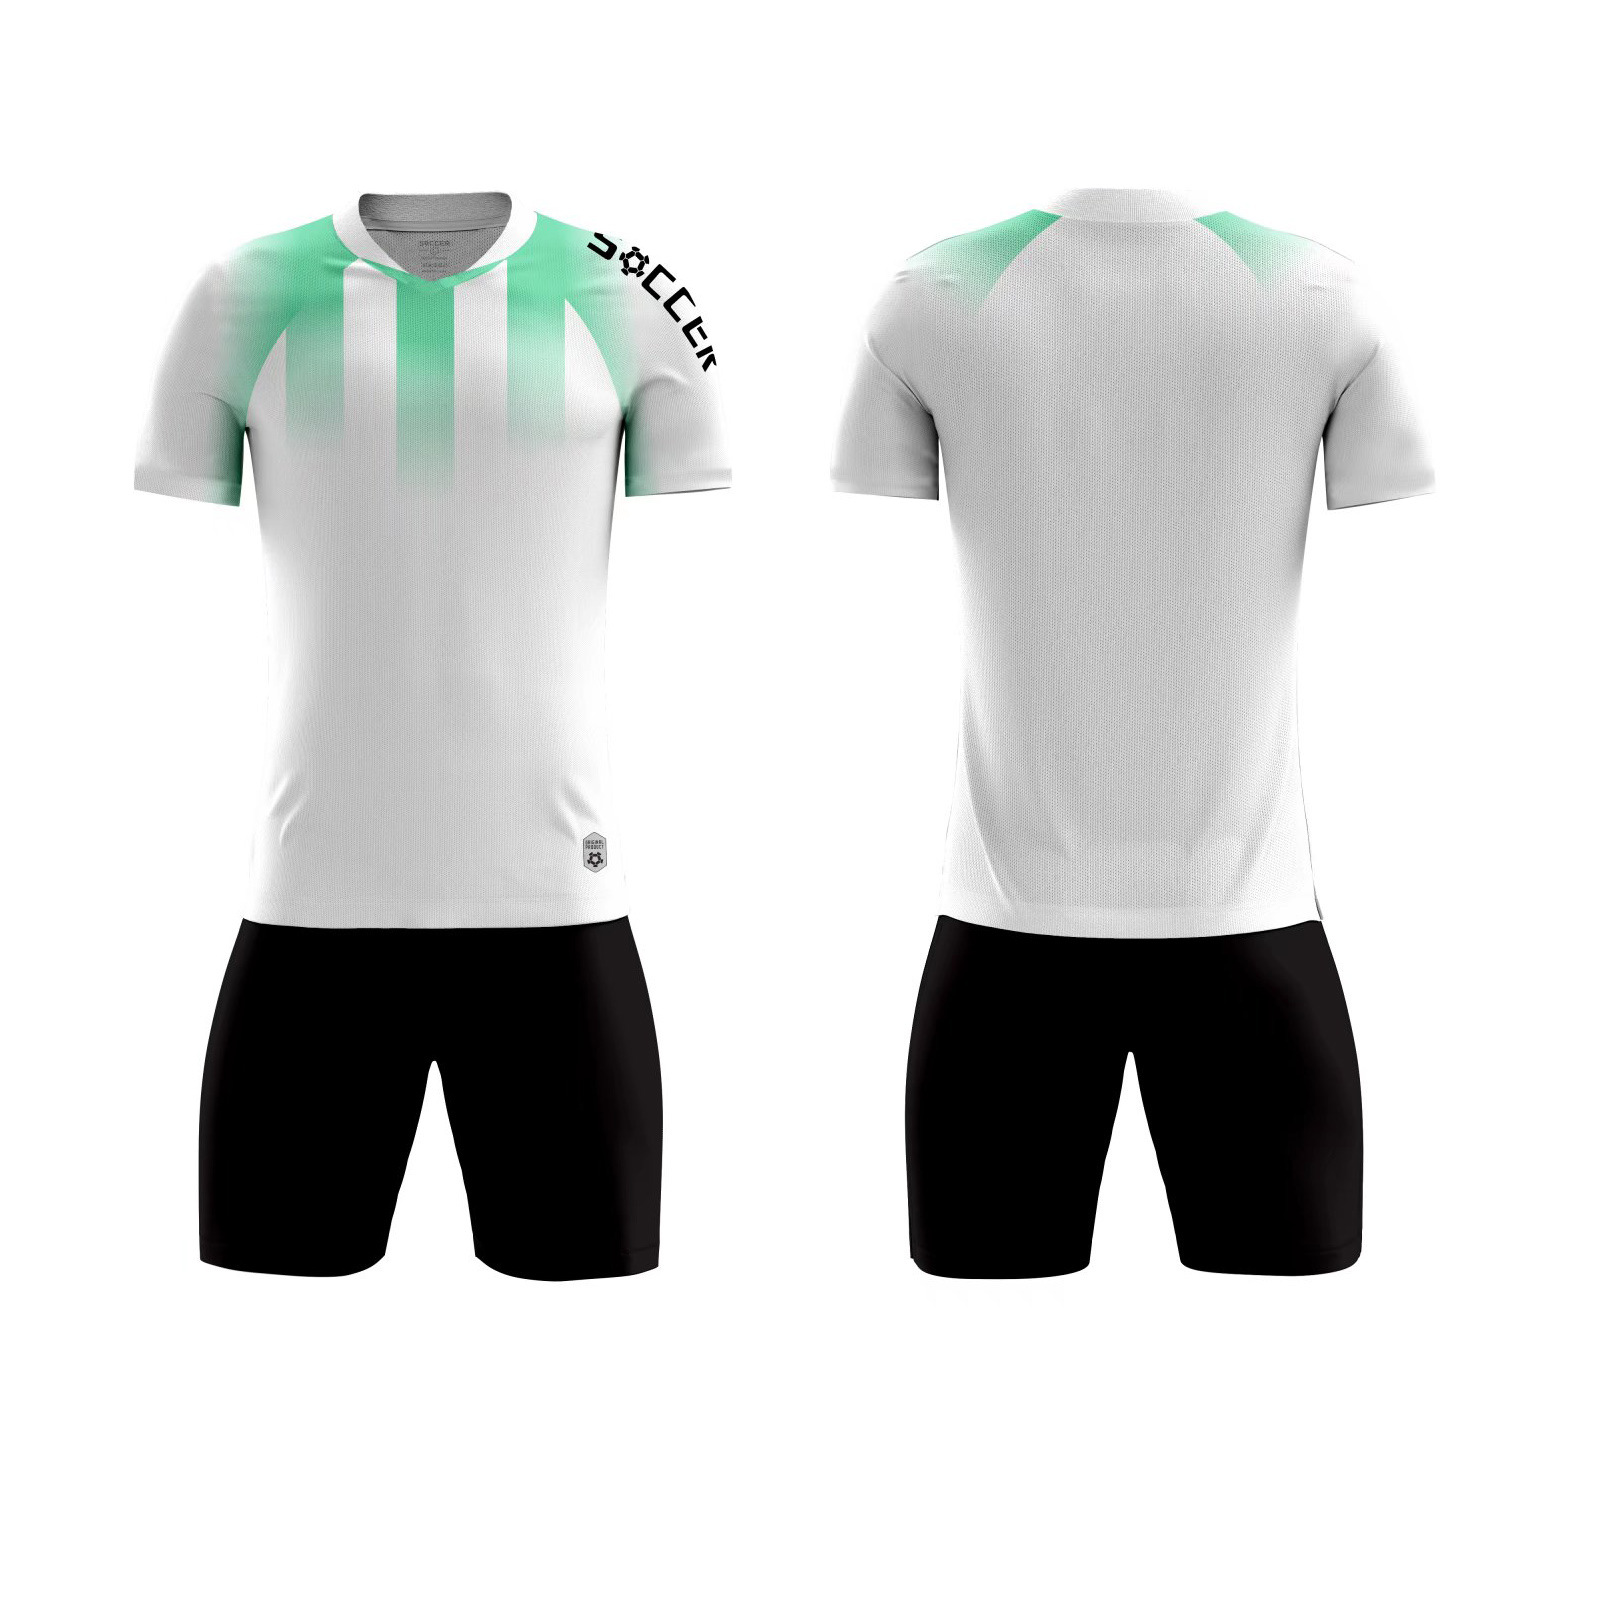 Men’s Football jersey sets trainning customized printing jersey sports sets Featured Image